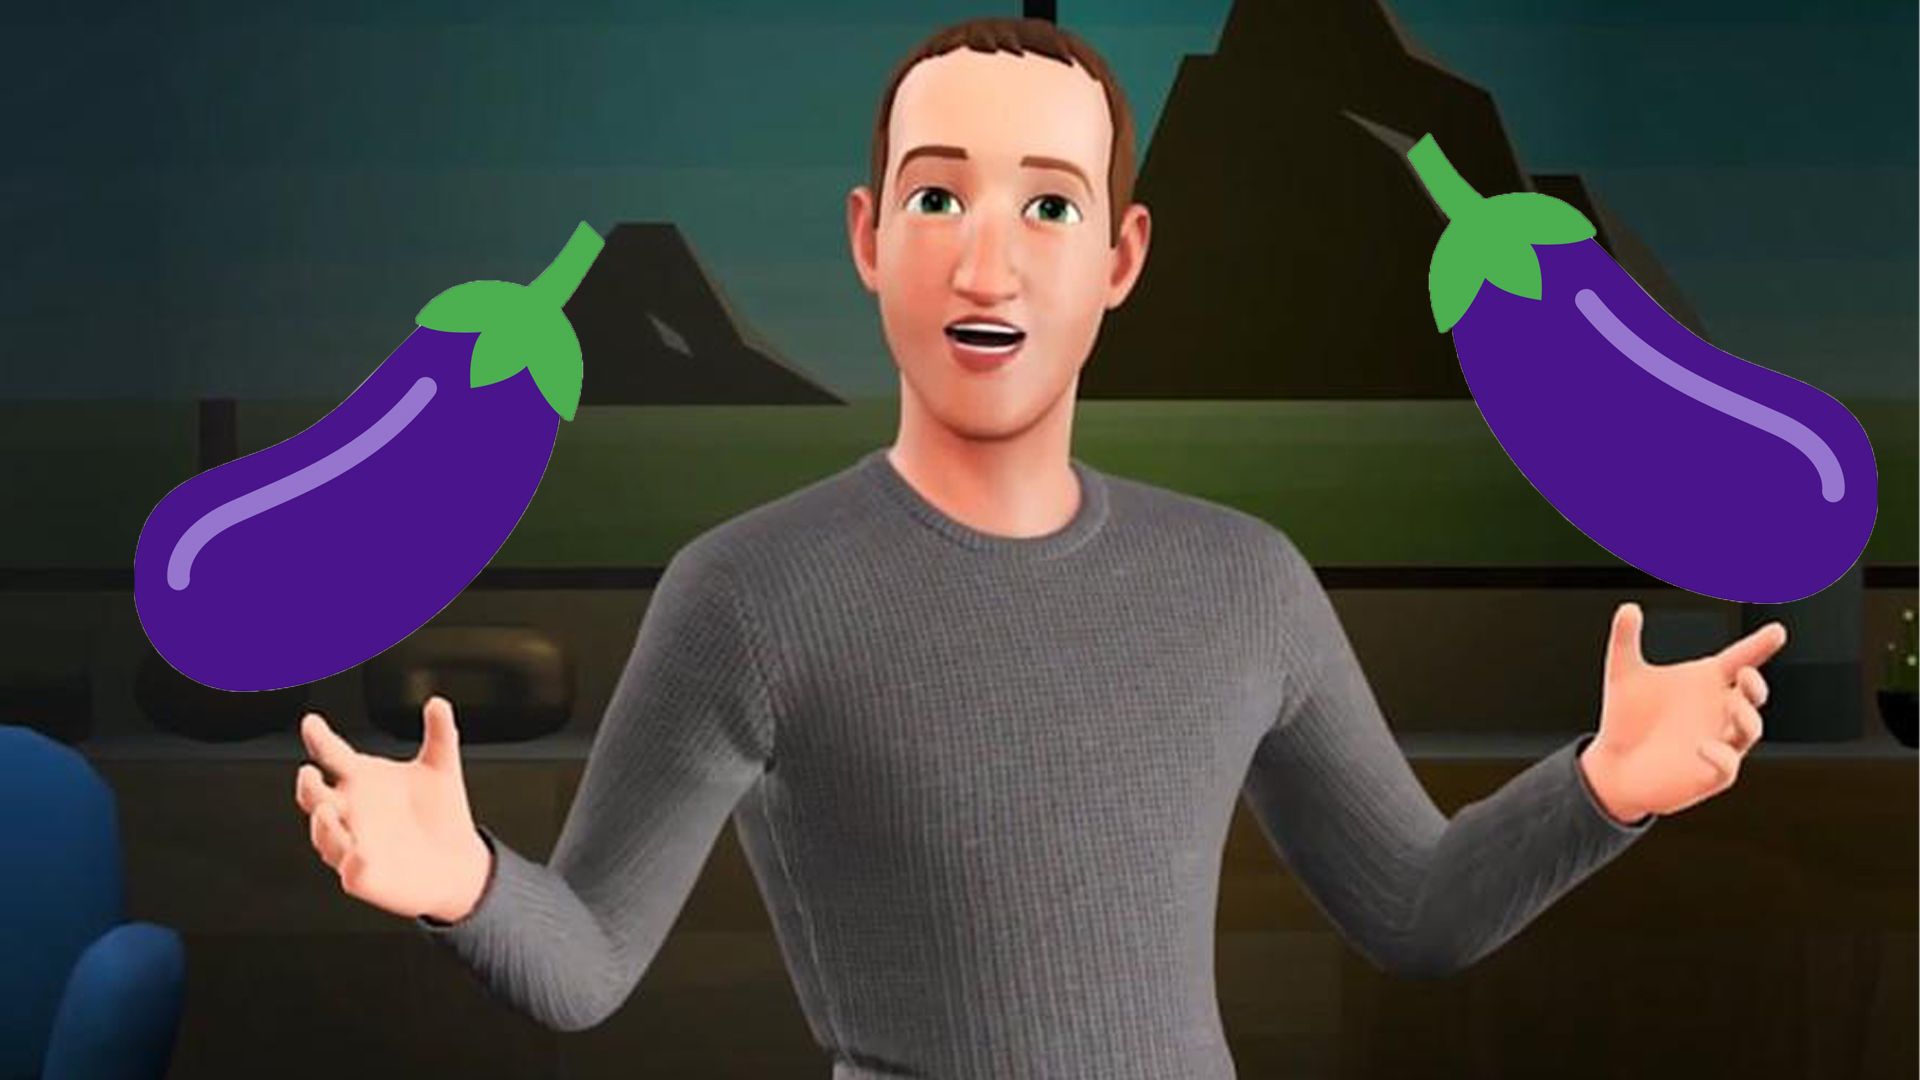 Zuckerberg Offers "Personal VR Handies" For Metaverse Users If They Please Just Use Metaverse